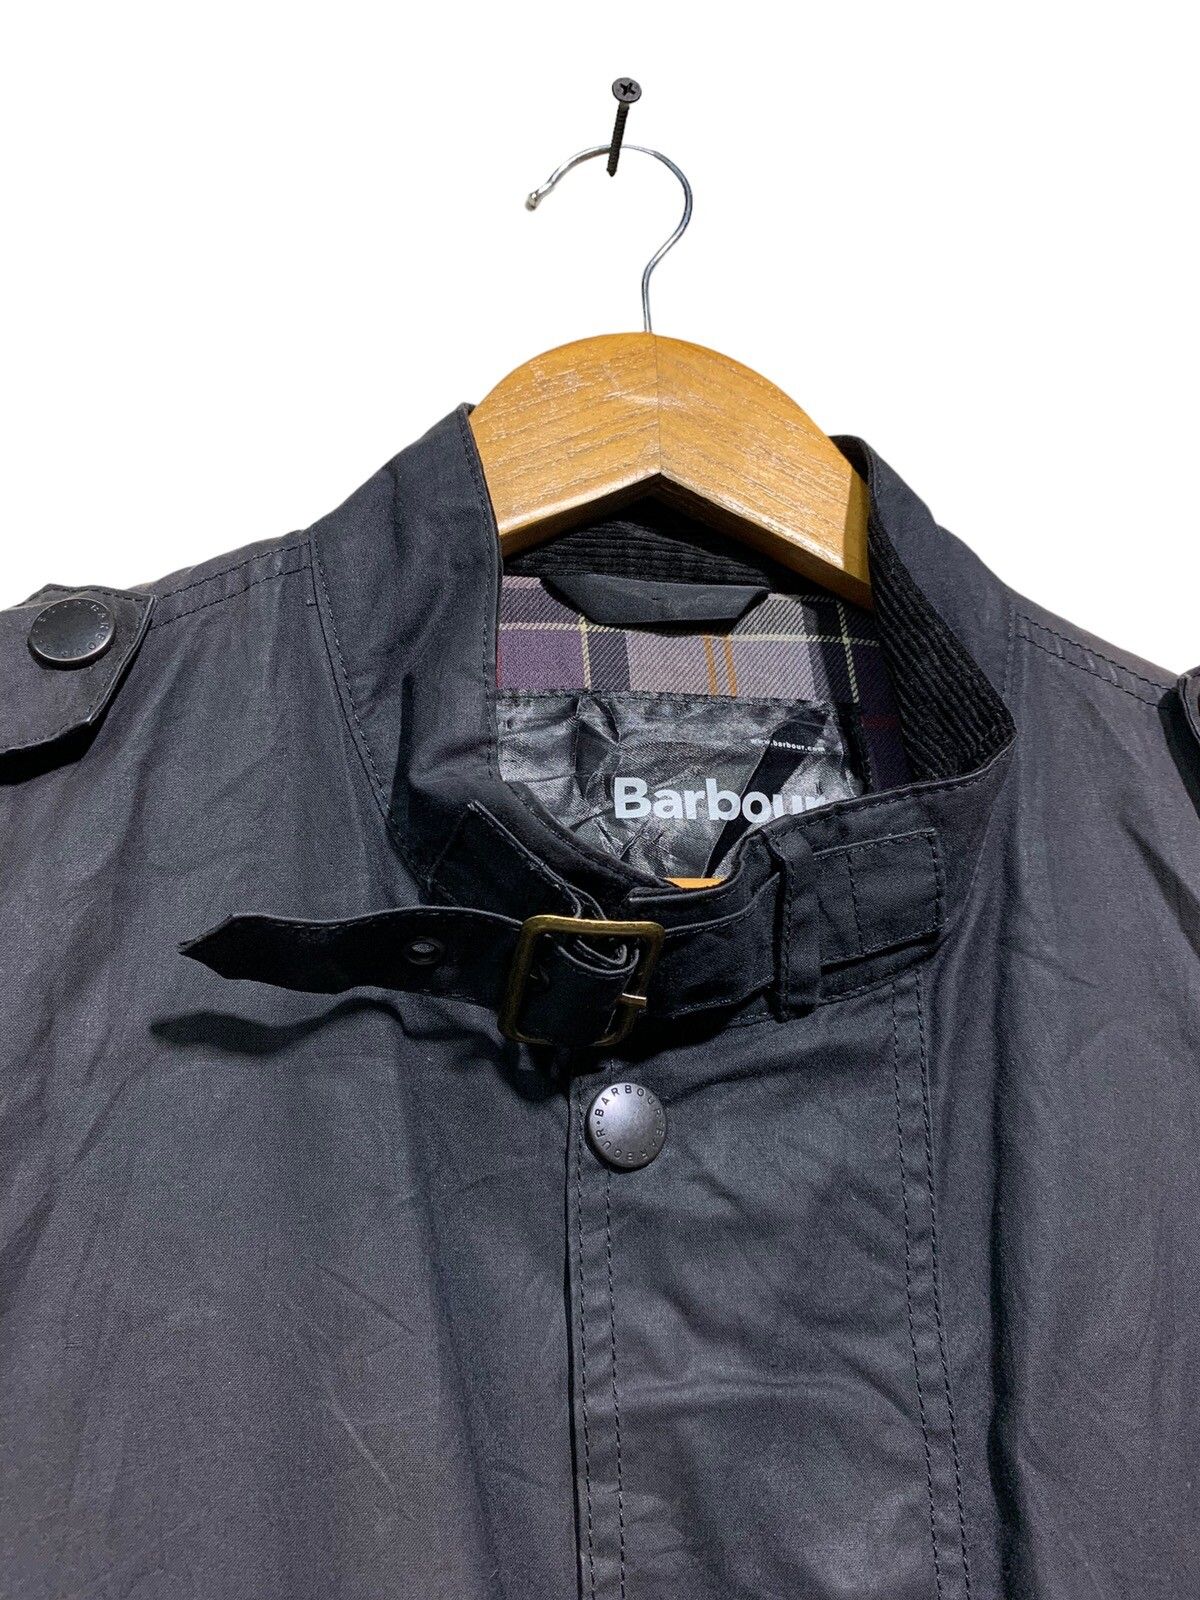 🔥BARBOUR INTERNATIONAL WAXED BOMBER JACKETS - 4